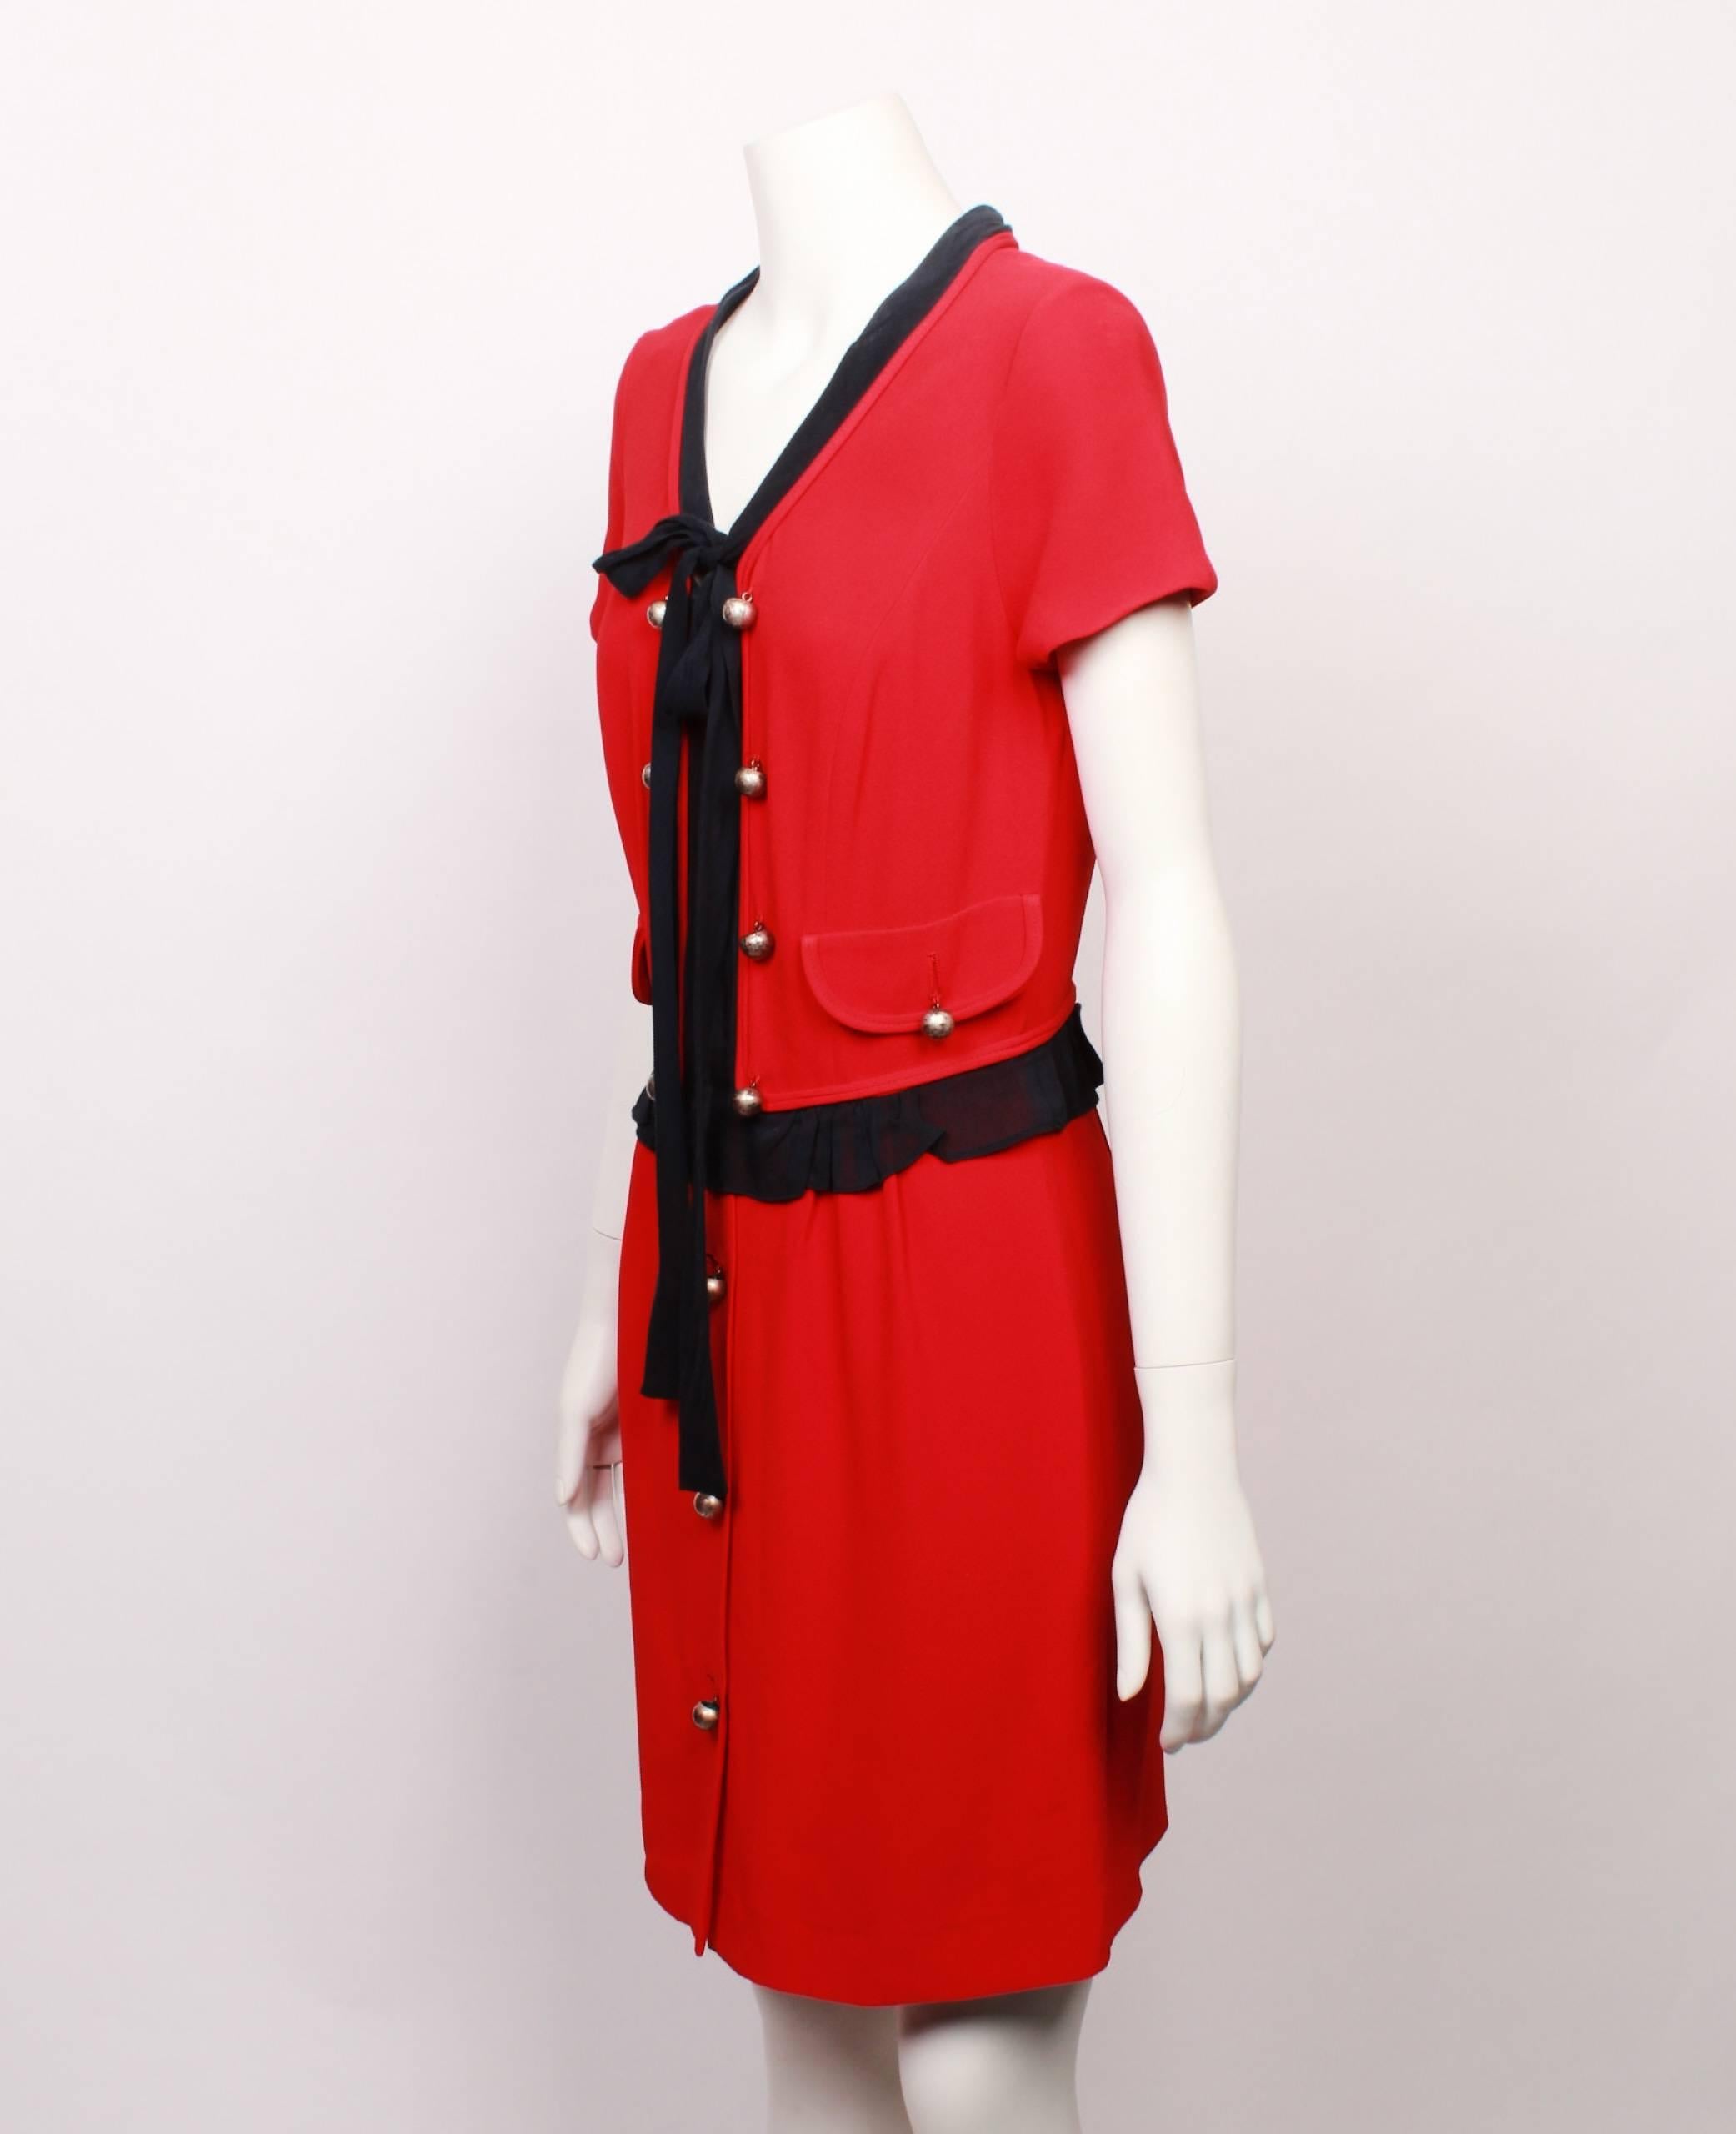 Moschino Cheap and Chic Red and Black Dress In Good Condition For Sale In Melbourne, Victoria